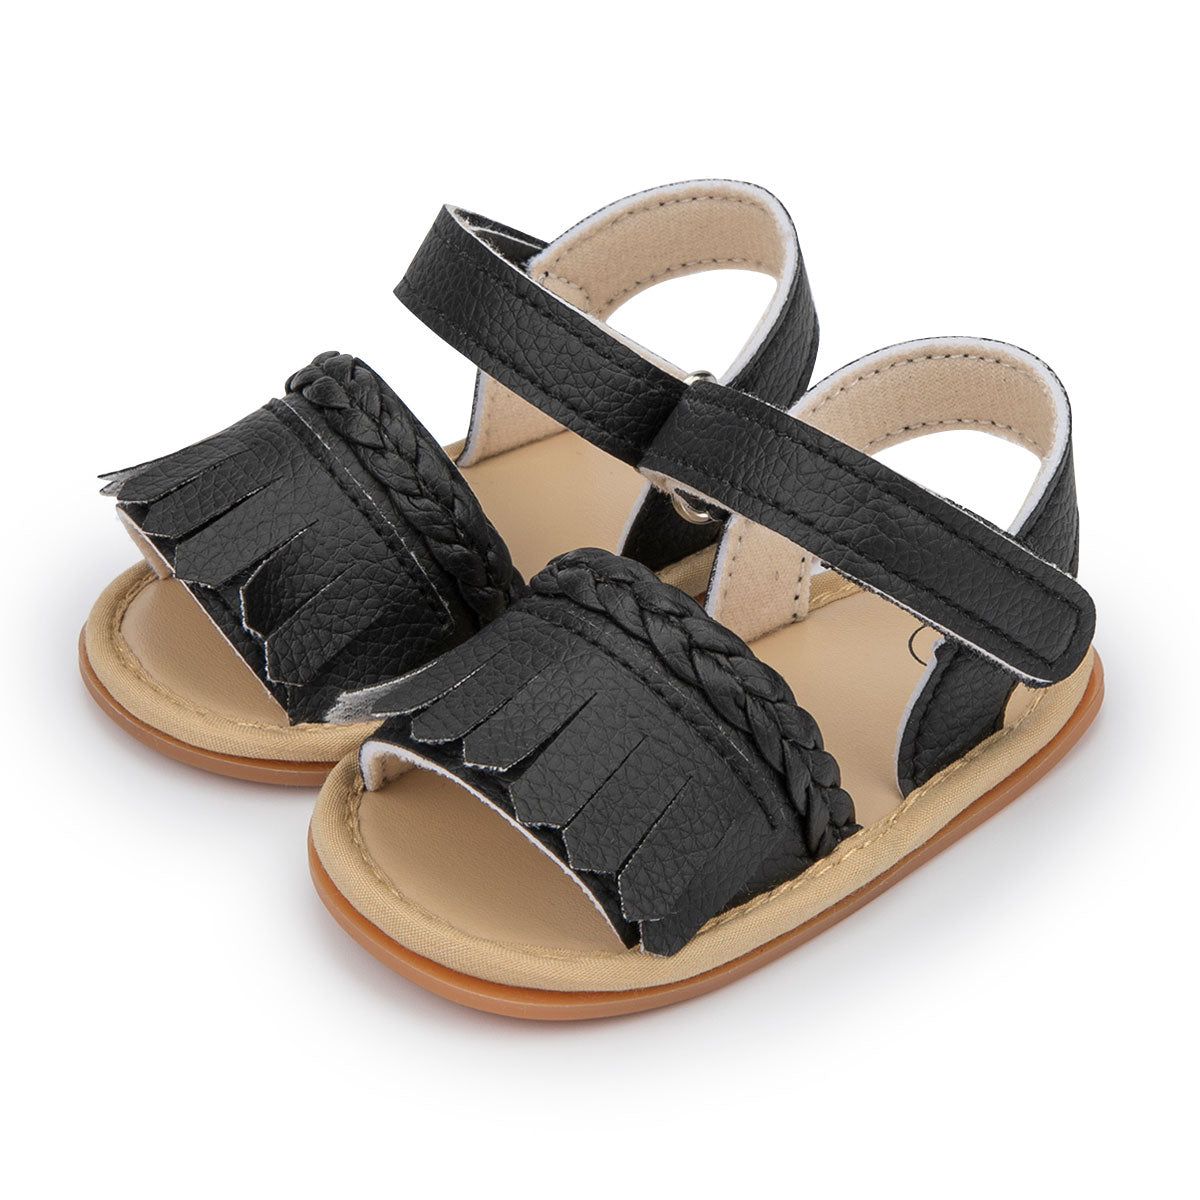 Summer Sandals Baby Girl PU Leather Shoes Baby